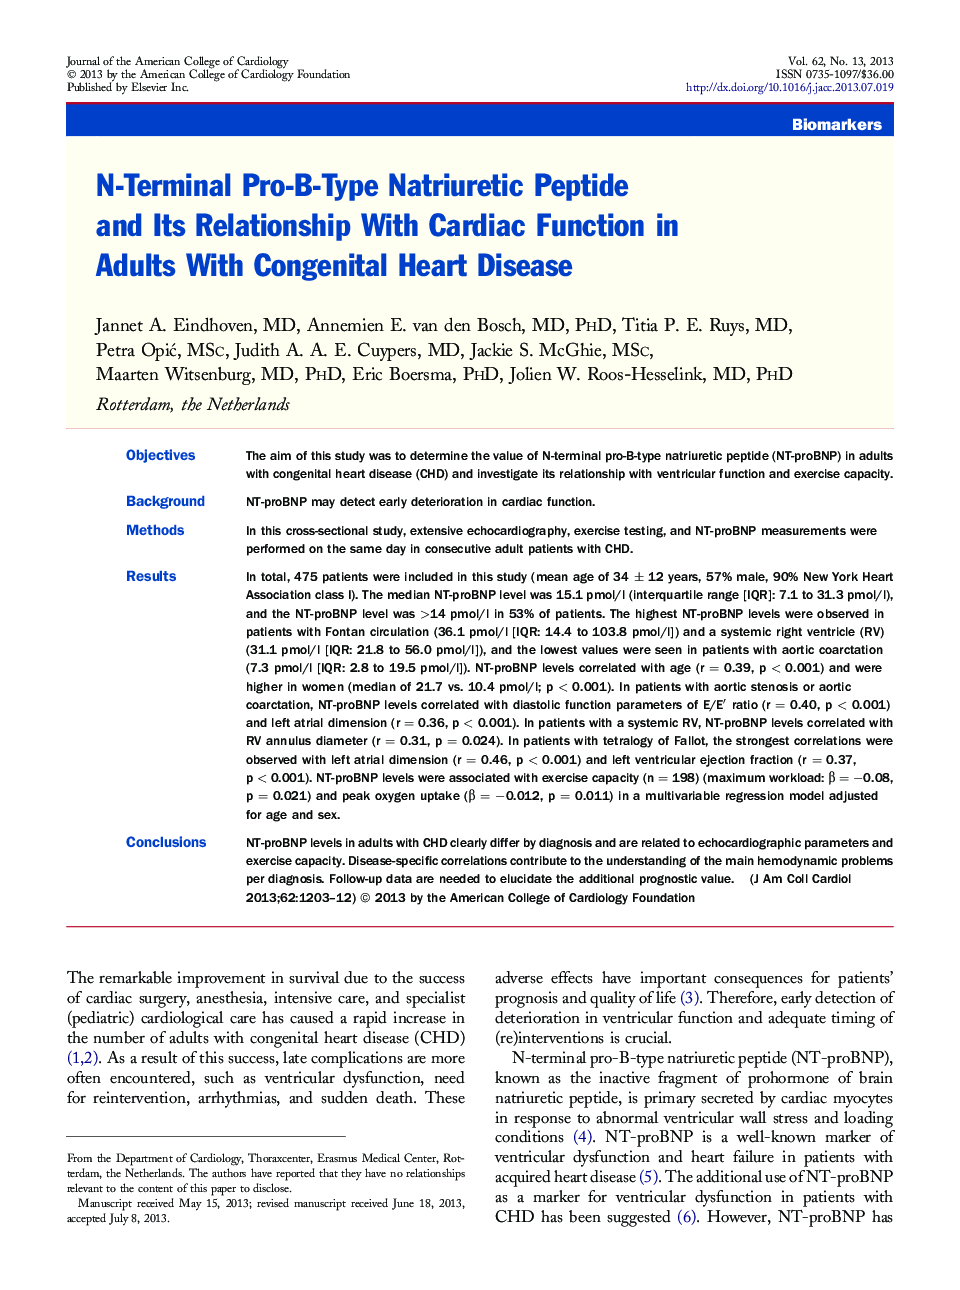 N-Terminal Pro-B-Type Natriuretic Peptide and Its Relationship With Cardiac Function in Adults With Congenital Heart Disease 